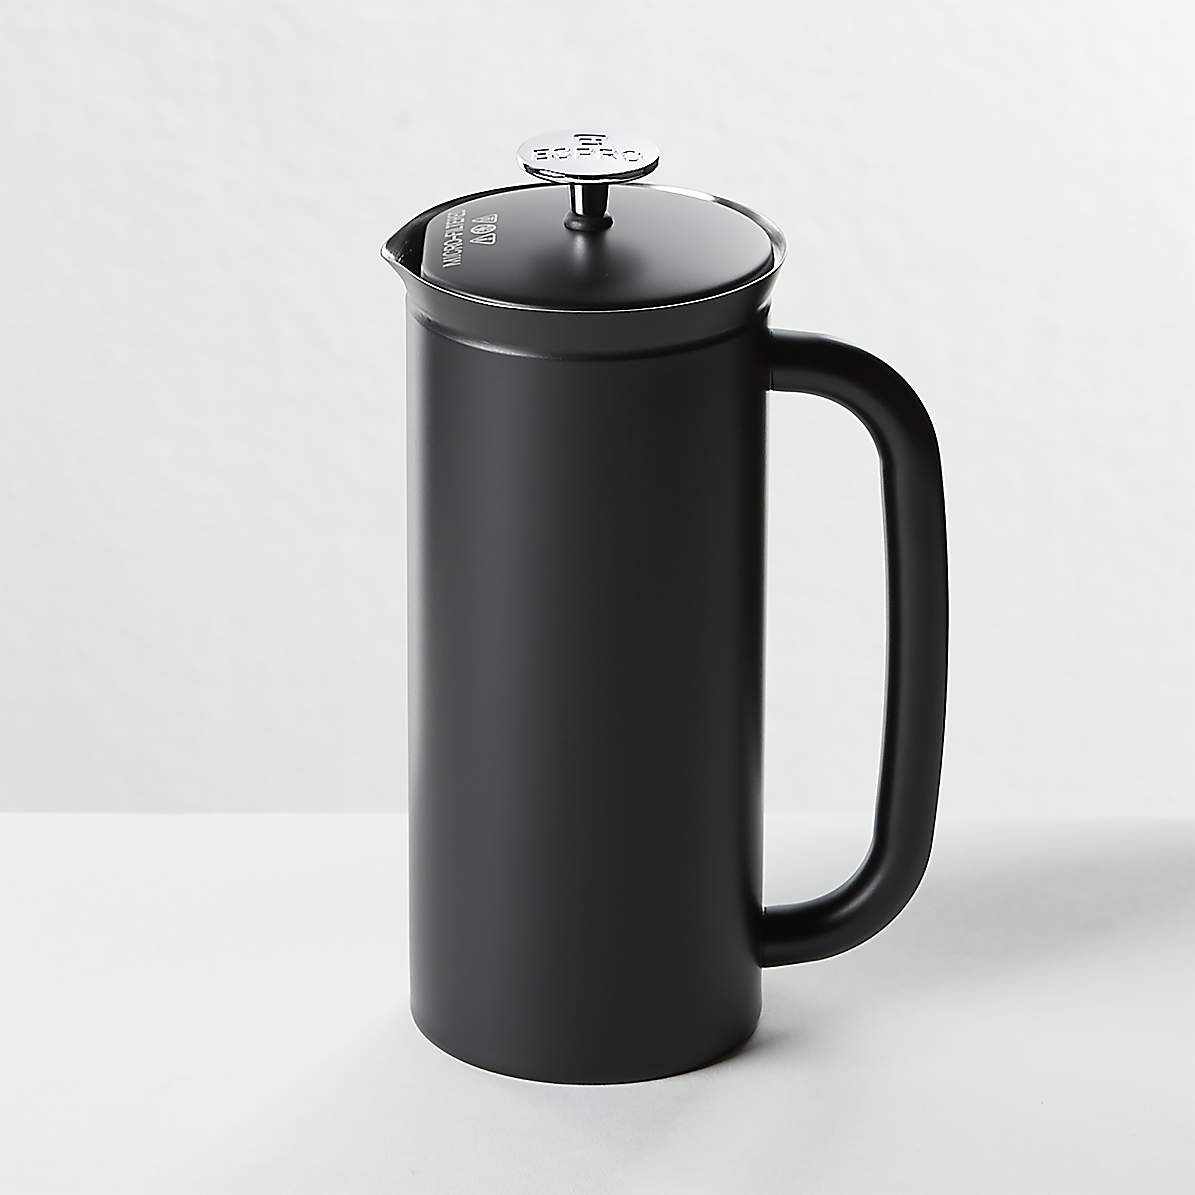 ESPRO P7 18-Oz. Matte Black Stainless Steel French Press + Reviews 